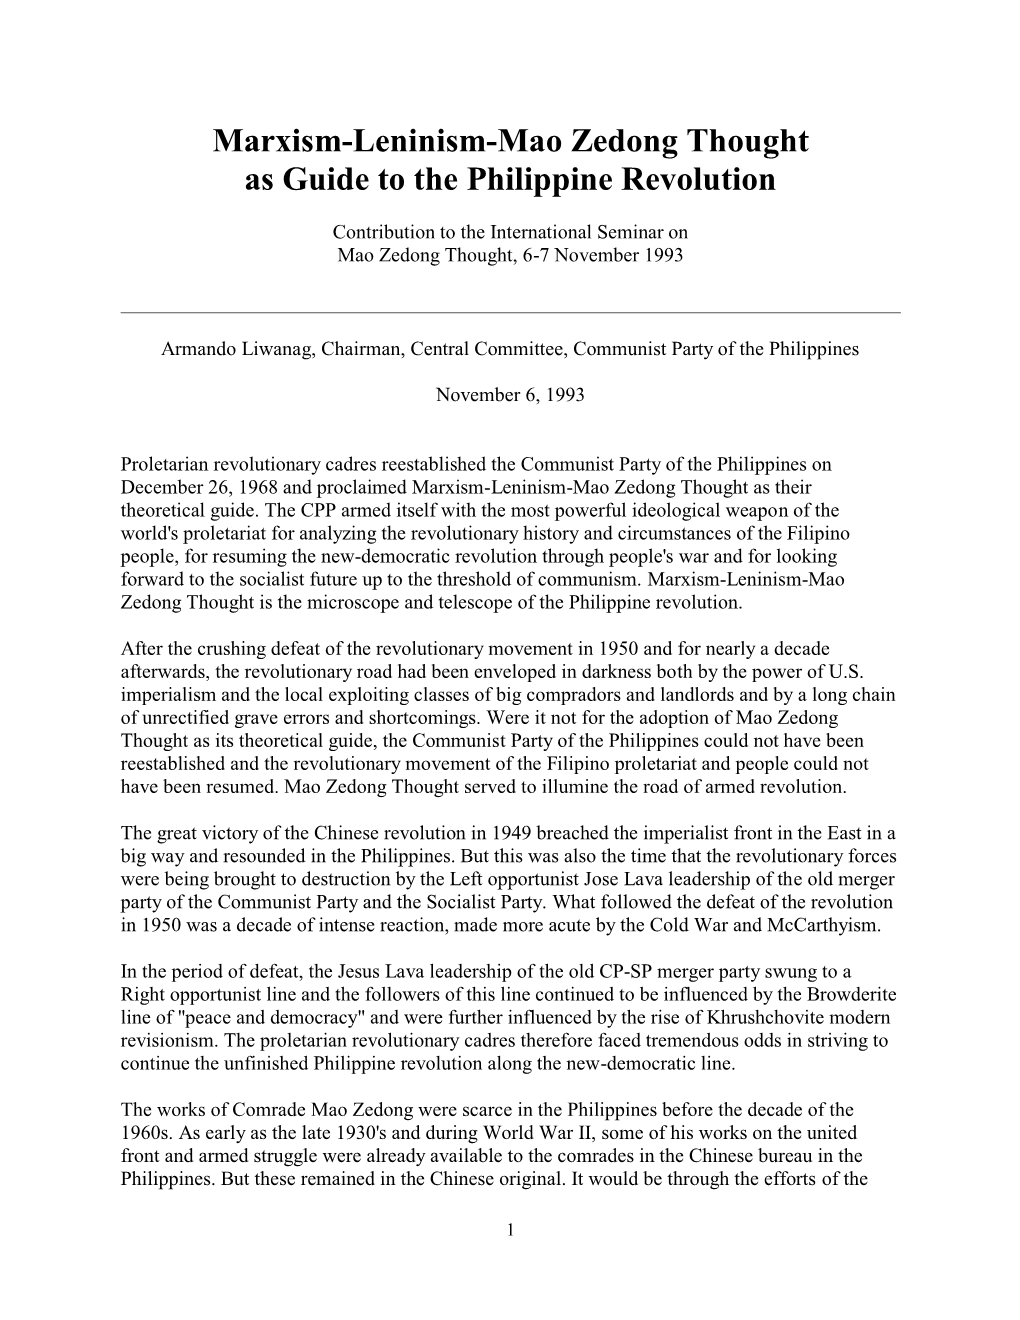 Marxism-Leninism-Mao Zedong Thought As Guide to the Philippine Revolution